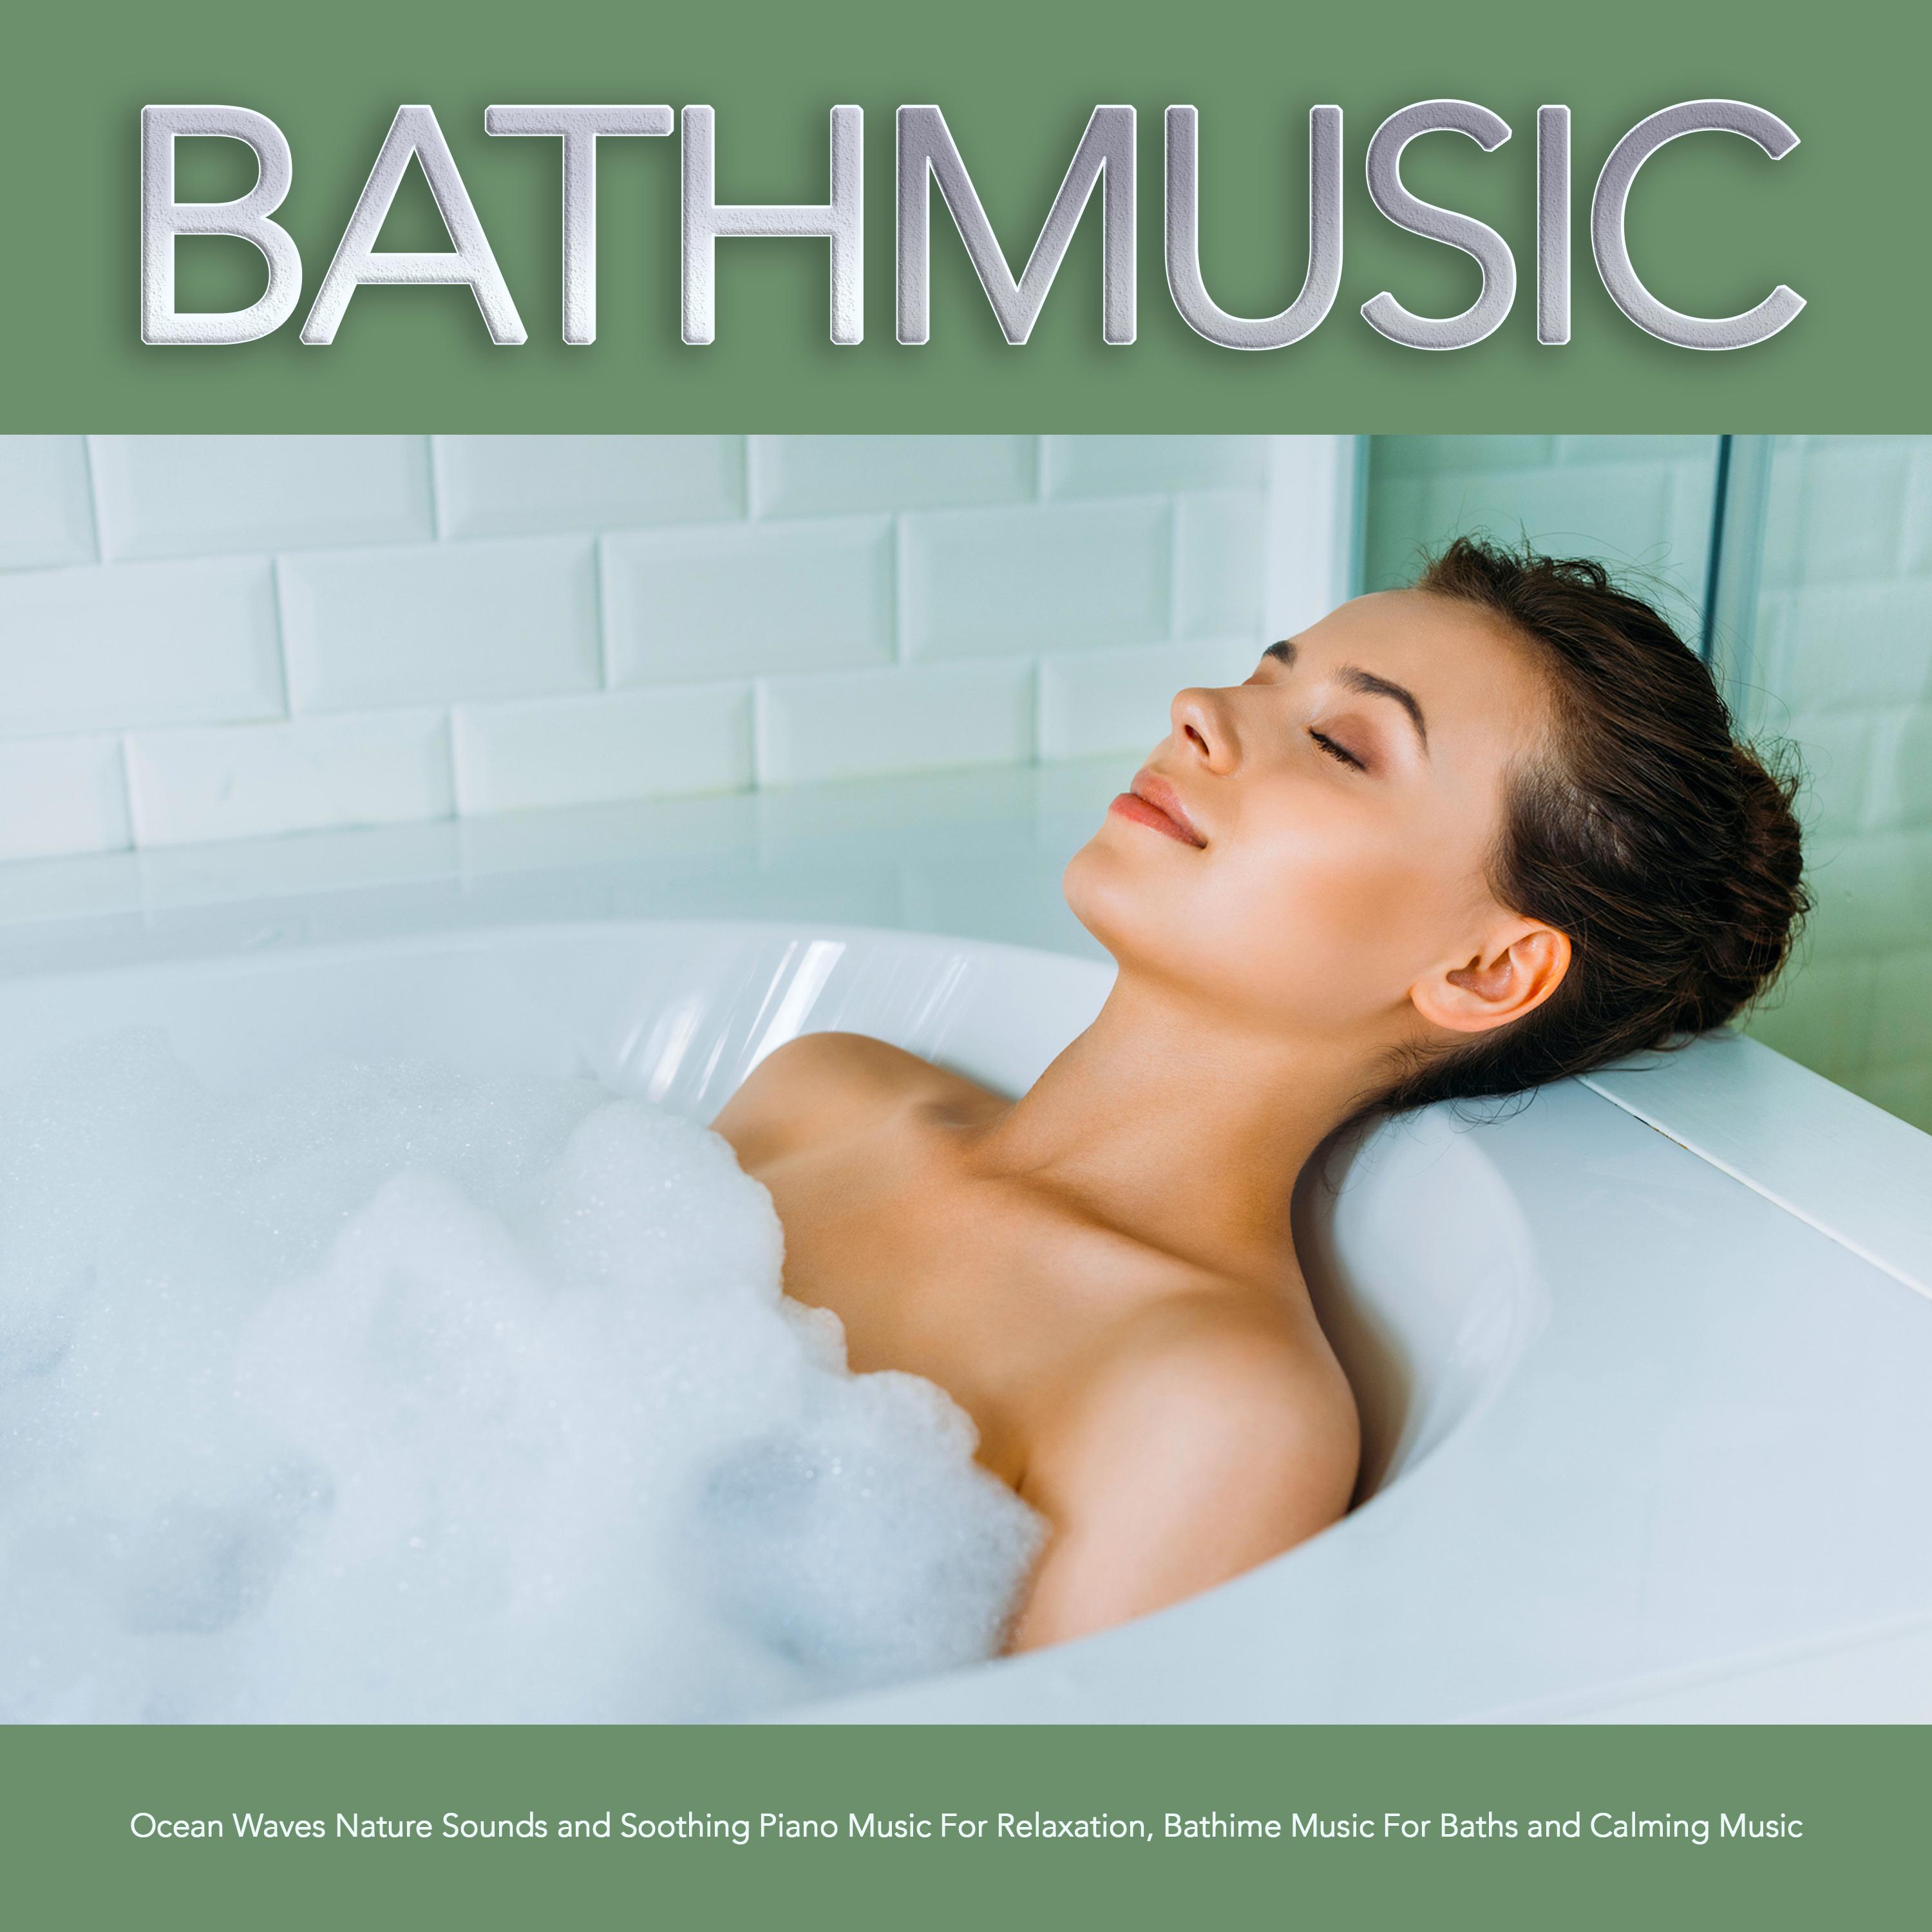 Bath Music: Ocean Waves Nature Sounds and Soothing Piano Music For Relaxation, Bathtime Music For Baths and Calming Music